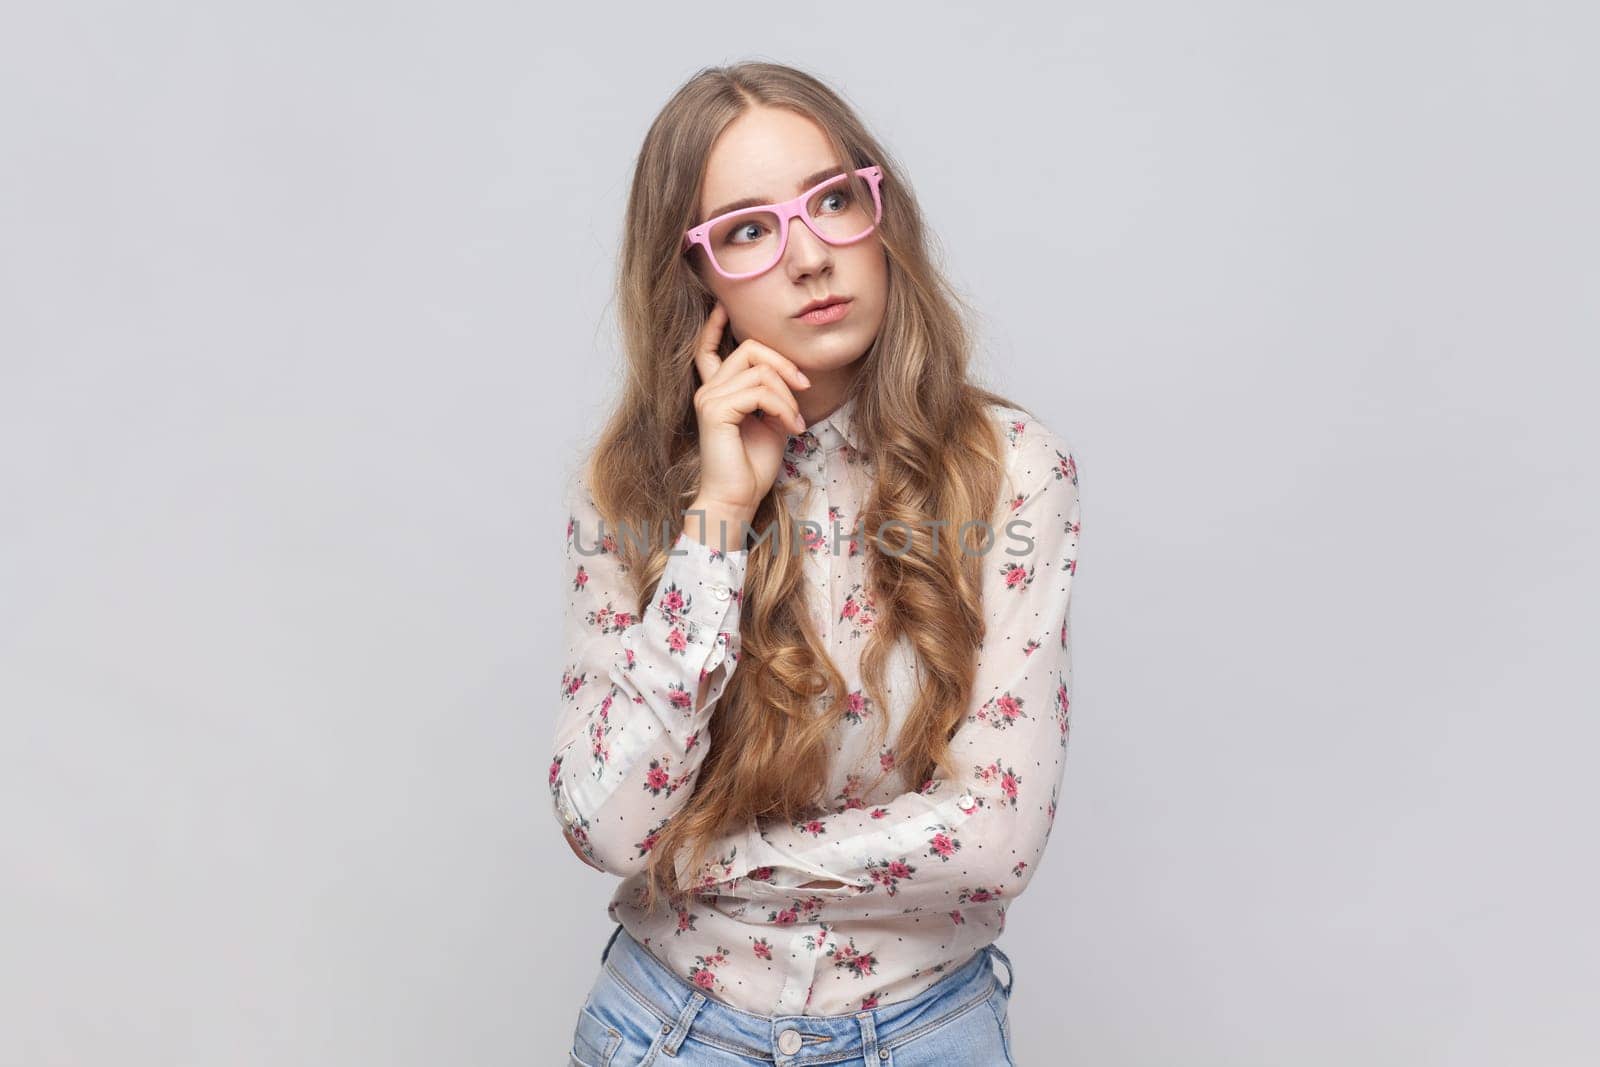 Let me think. Portrait of woman in glasses with wavy blond hair standing with puzzled serious expression, thinking doubting, making choice. Indoor studio shot isolated on gray background.